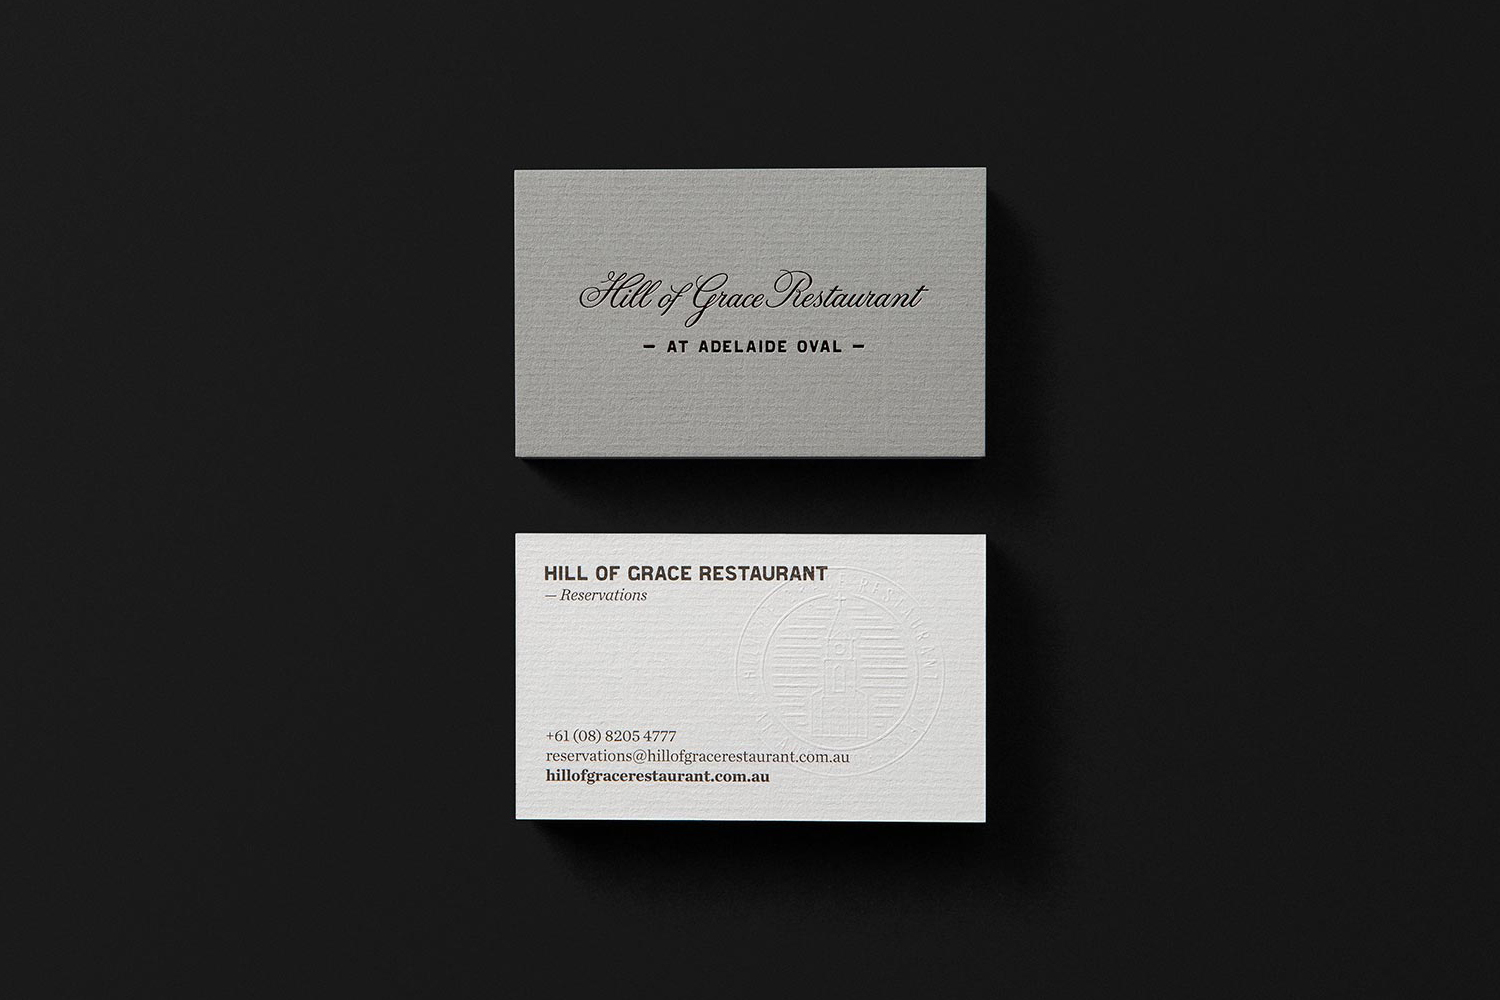 Business cards with emboss, foil and laid paper detail designed by Band for restaurant Hill Of Grace at Adelaide Oval